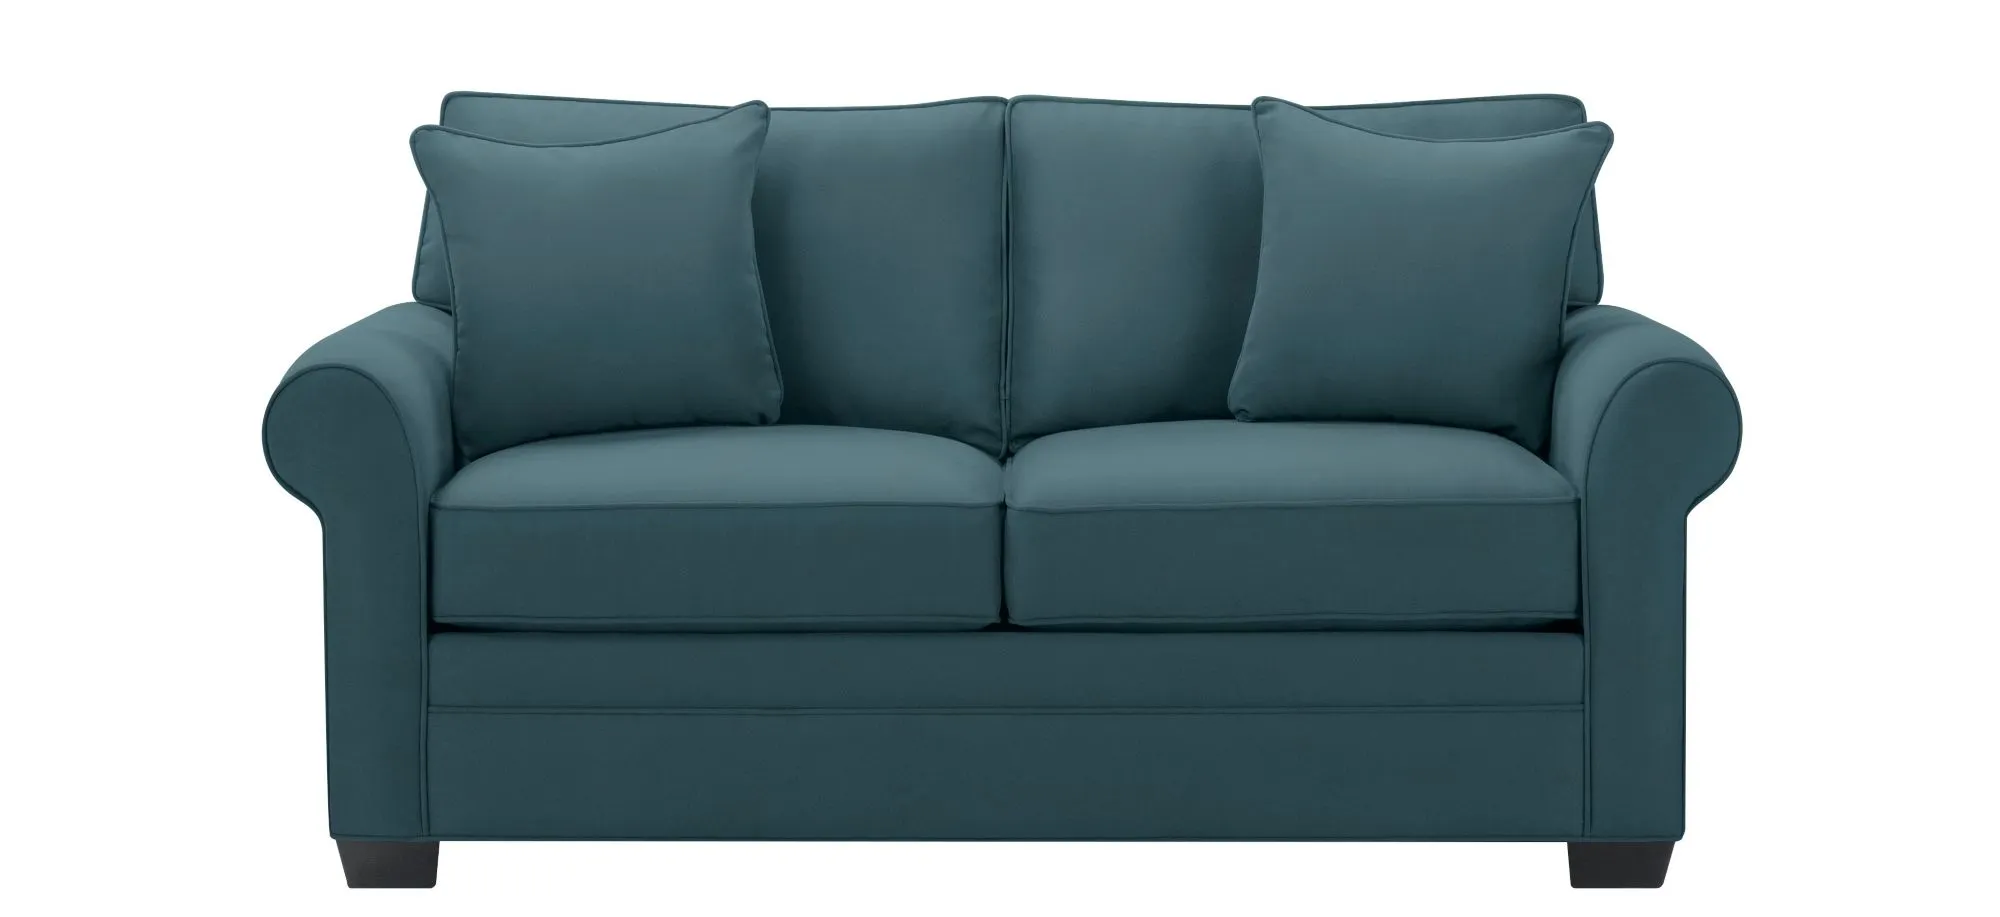 Glendora Apartment Sofa in Suede So Soft Lagoon by H.M. Richards